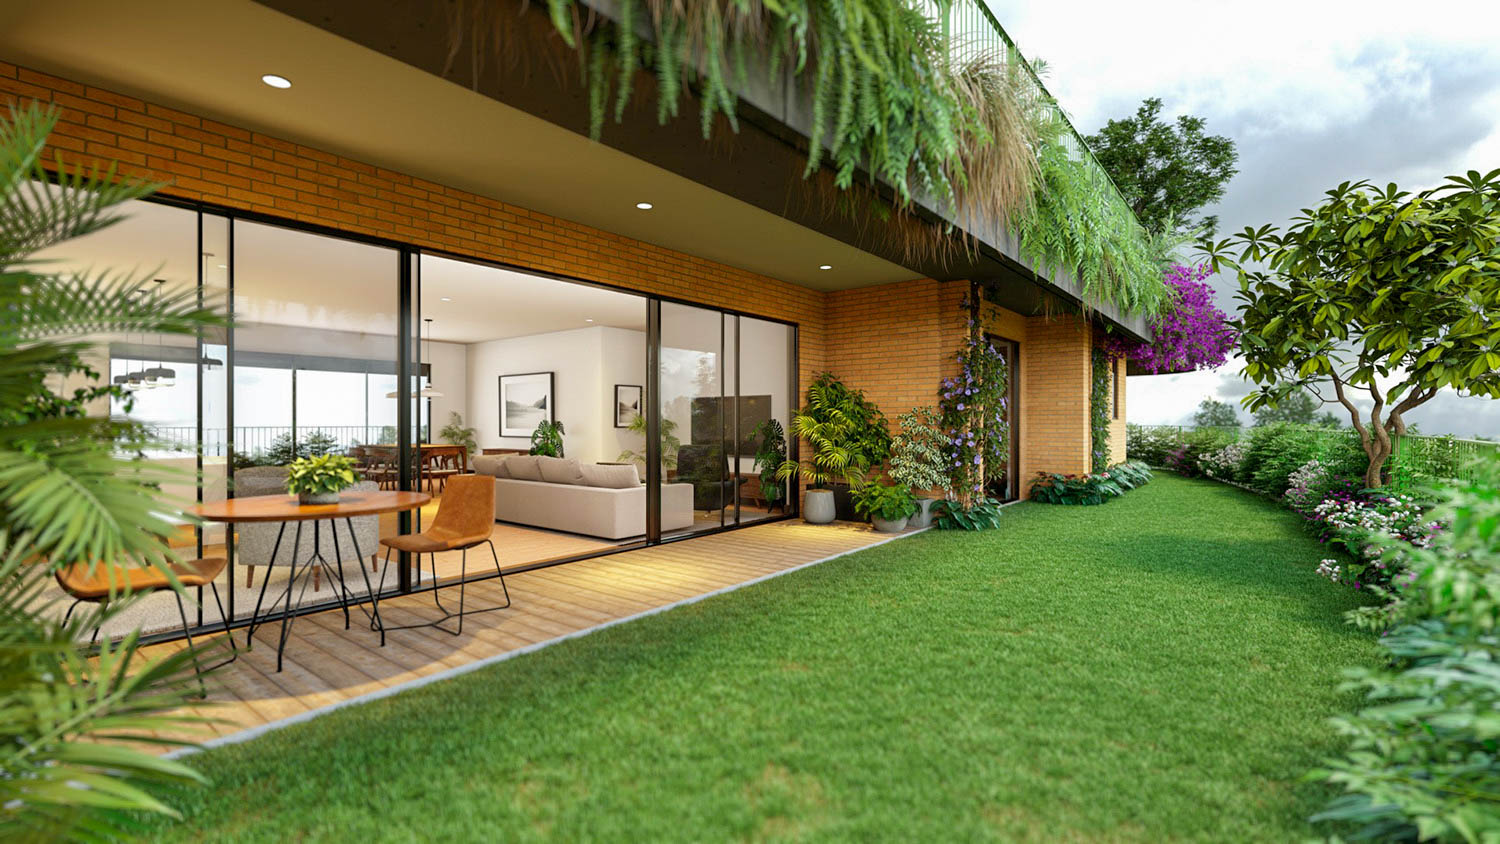 Terrace gardens can add vibrancy, serenity and healthy living to your